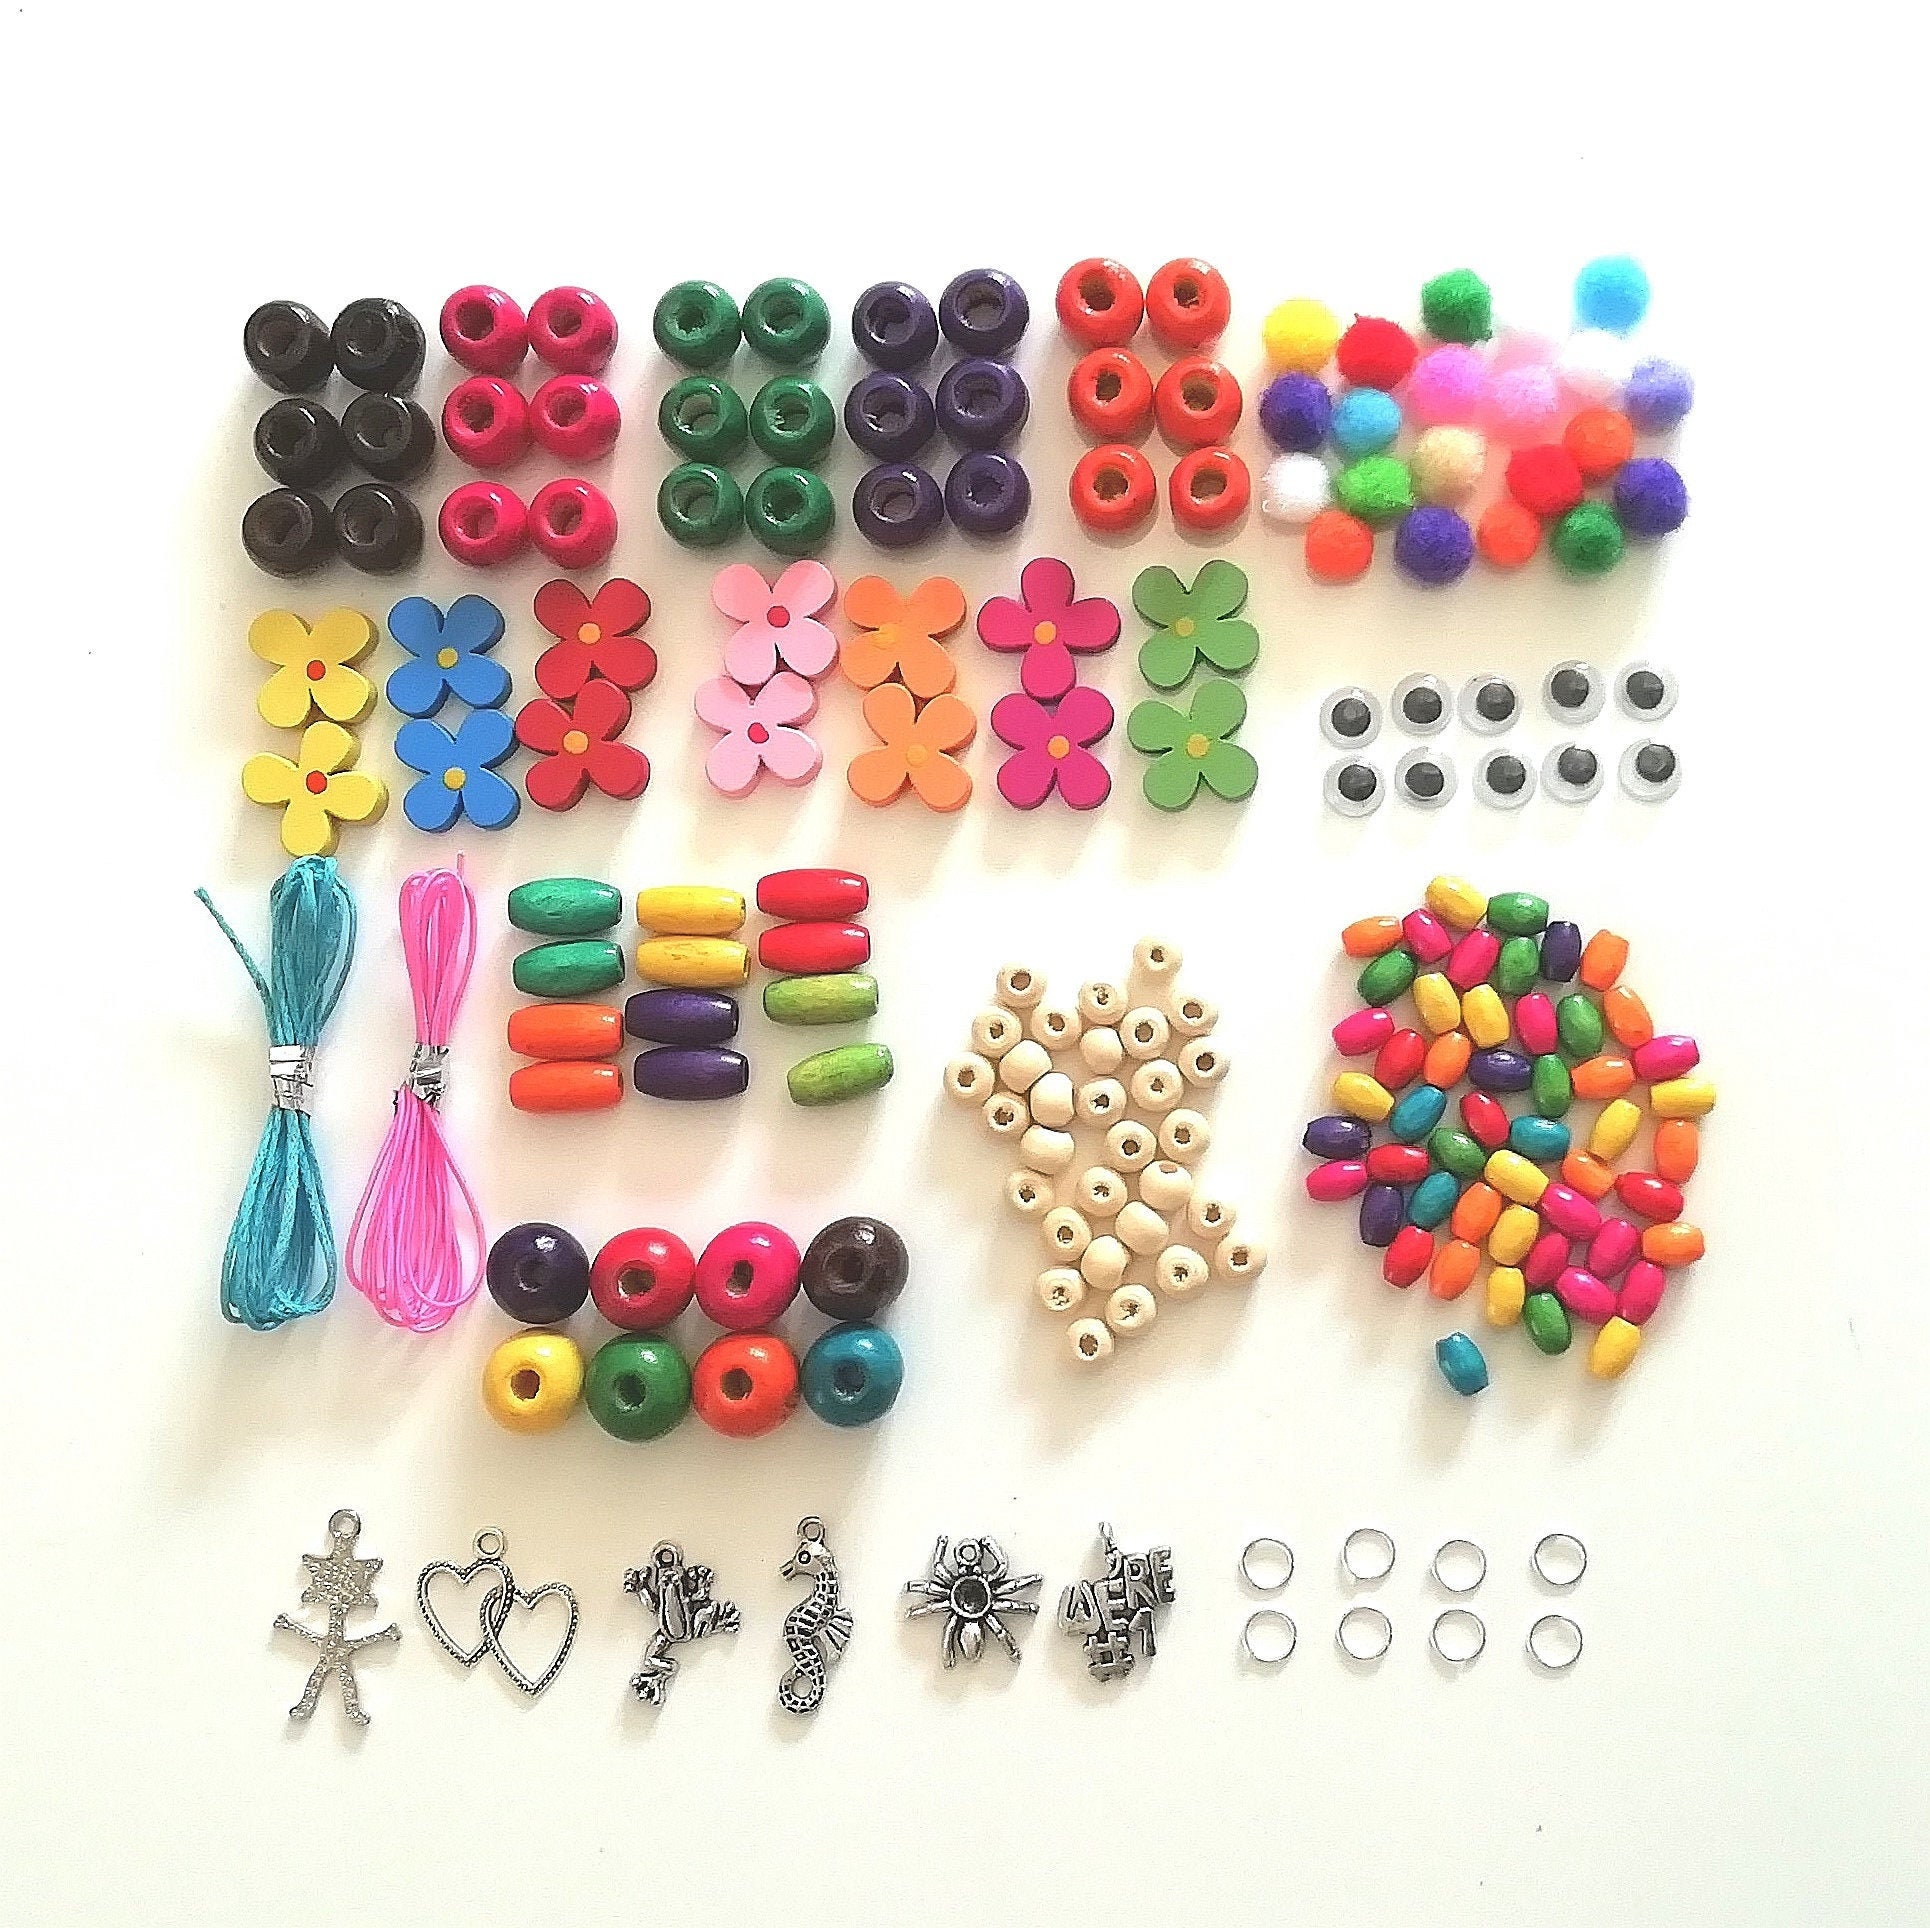 Jewelry Making Kit 3mm Glass Seed Beads and Alphabet Letter Beads for  Jewelry Making and Crafts Beads for Name Bracelets Making Kit 